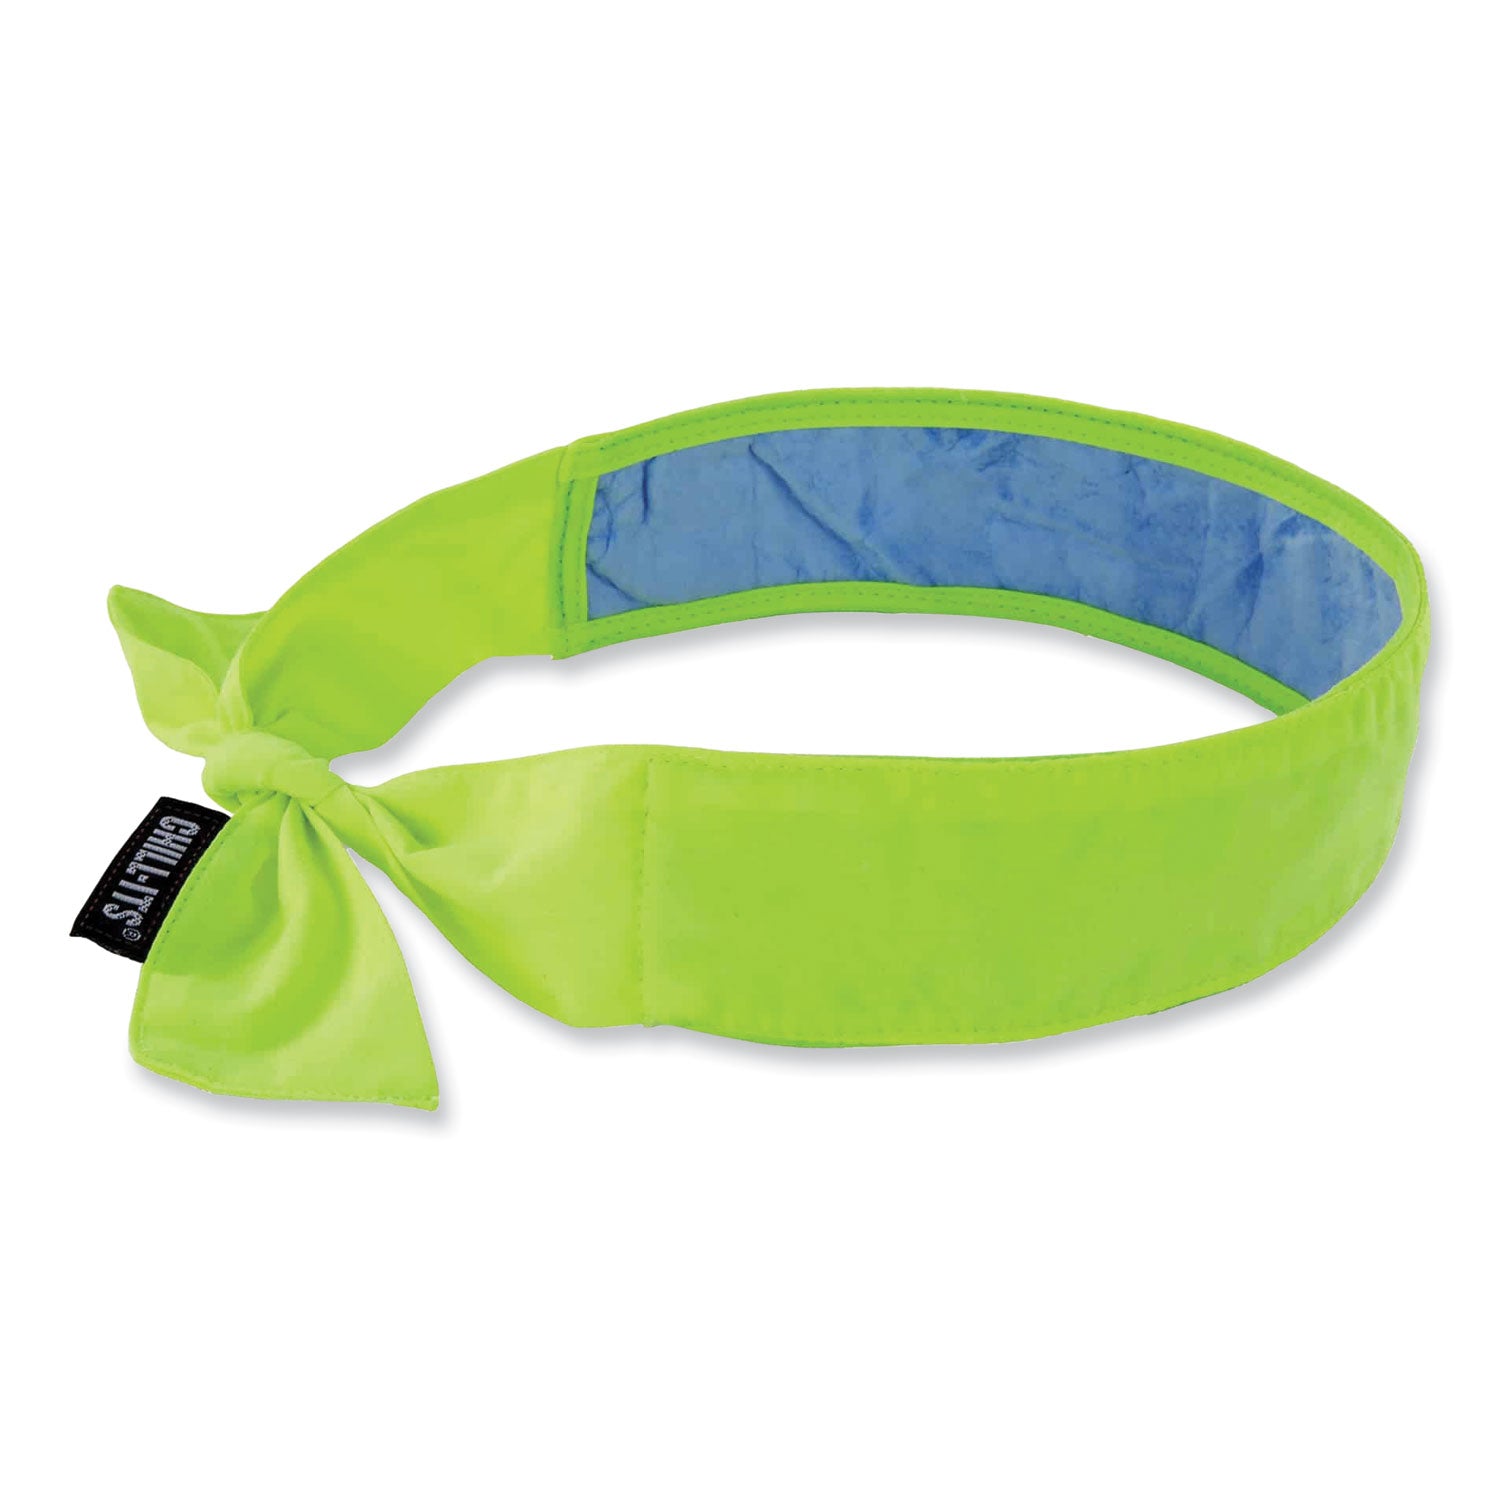 chill-its-6700ct-cooling-bandana-pva-tie-headband-one-size-fits-most-lime-ships-in-1-3-business-days_ego12566 - 1